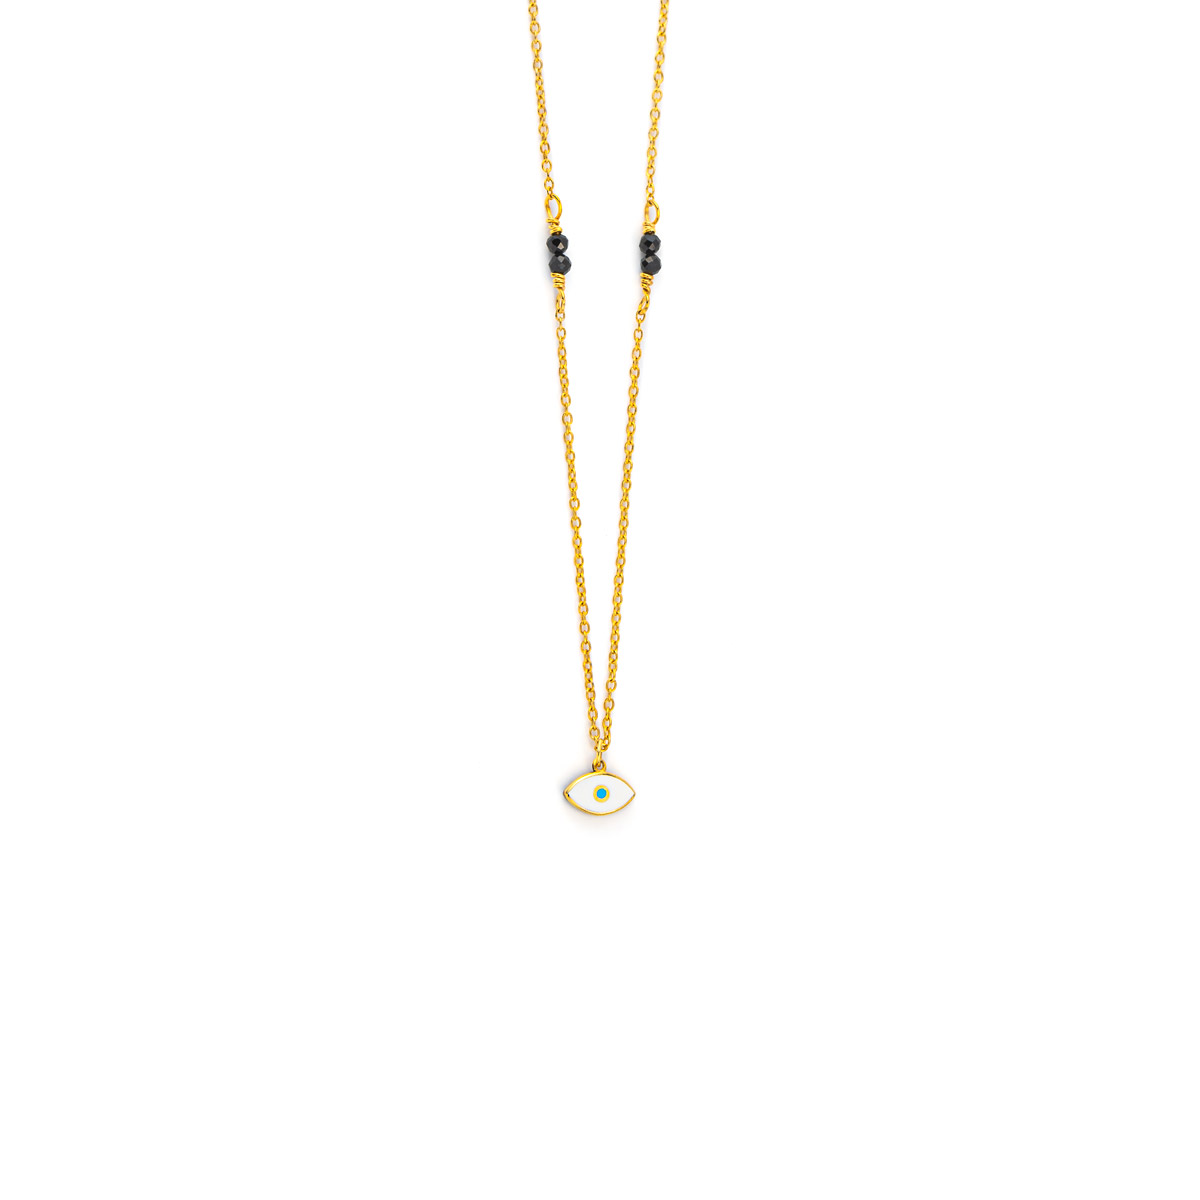 Eye Double Necklace - 9K Gold with Zircon